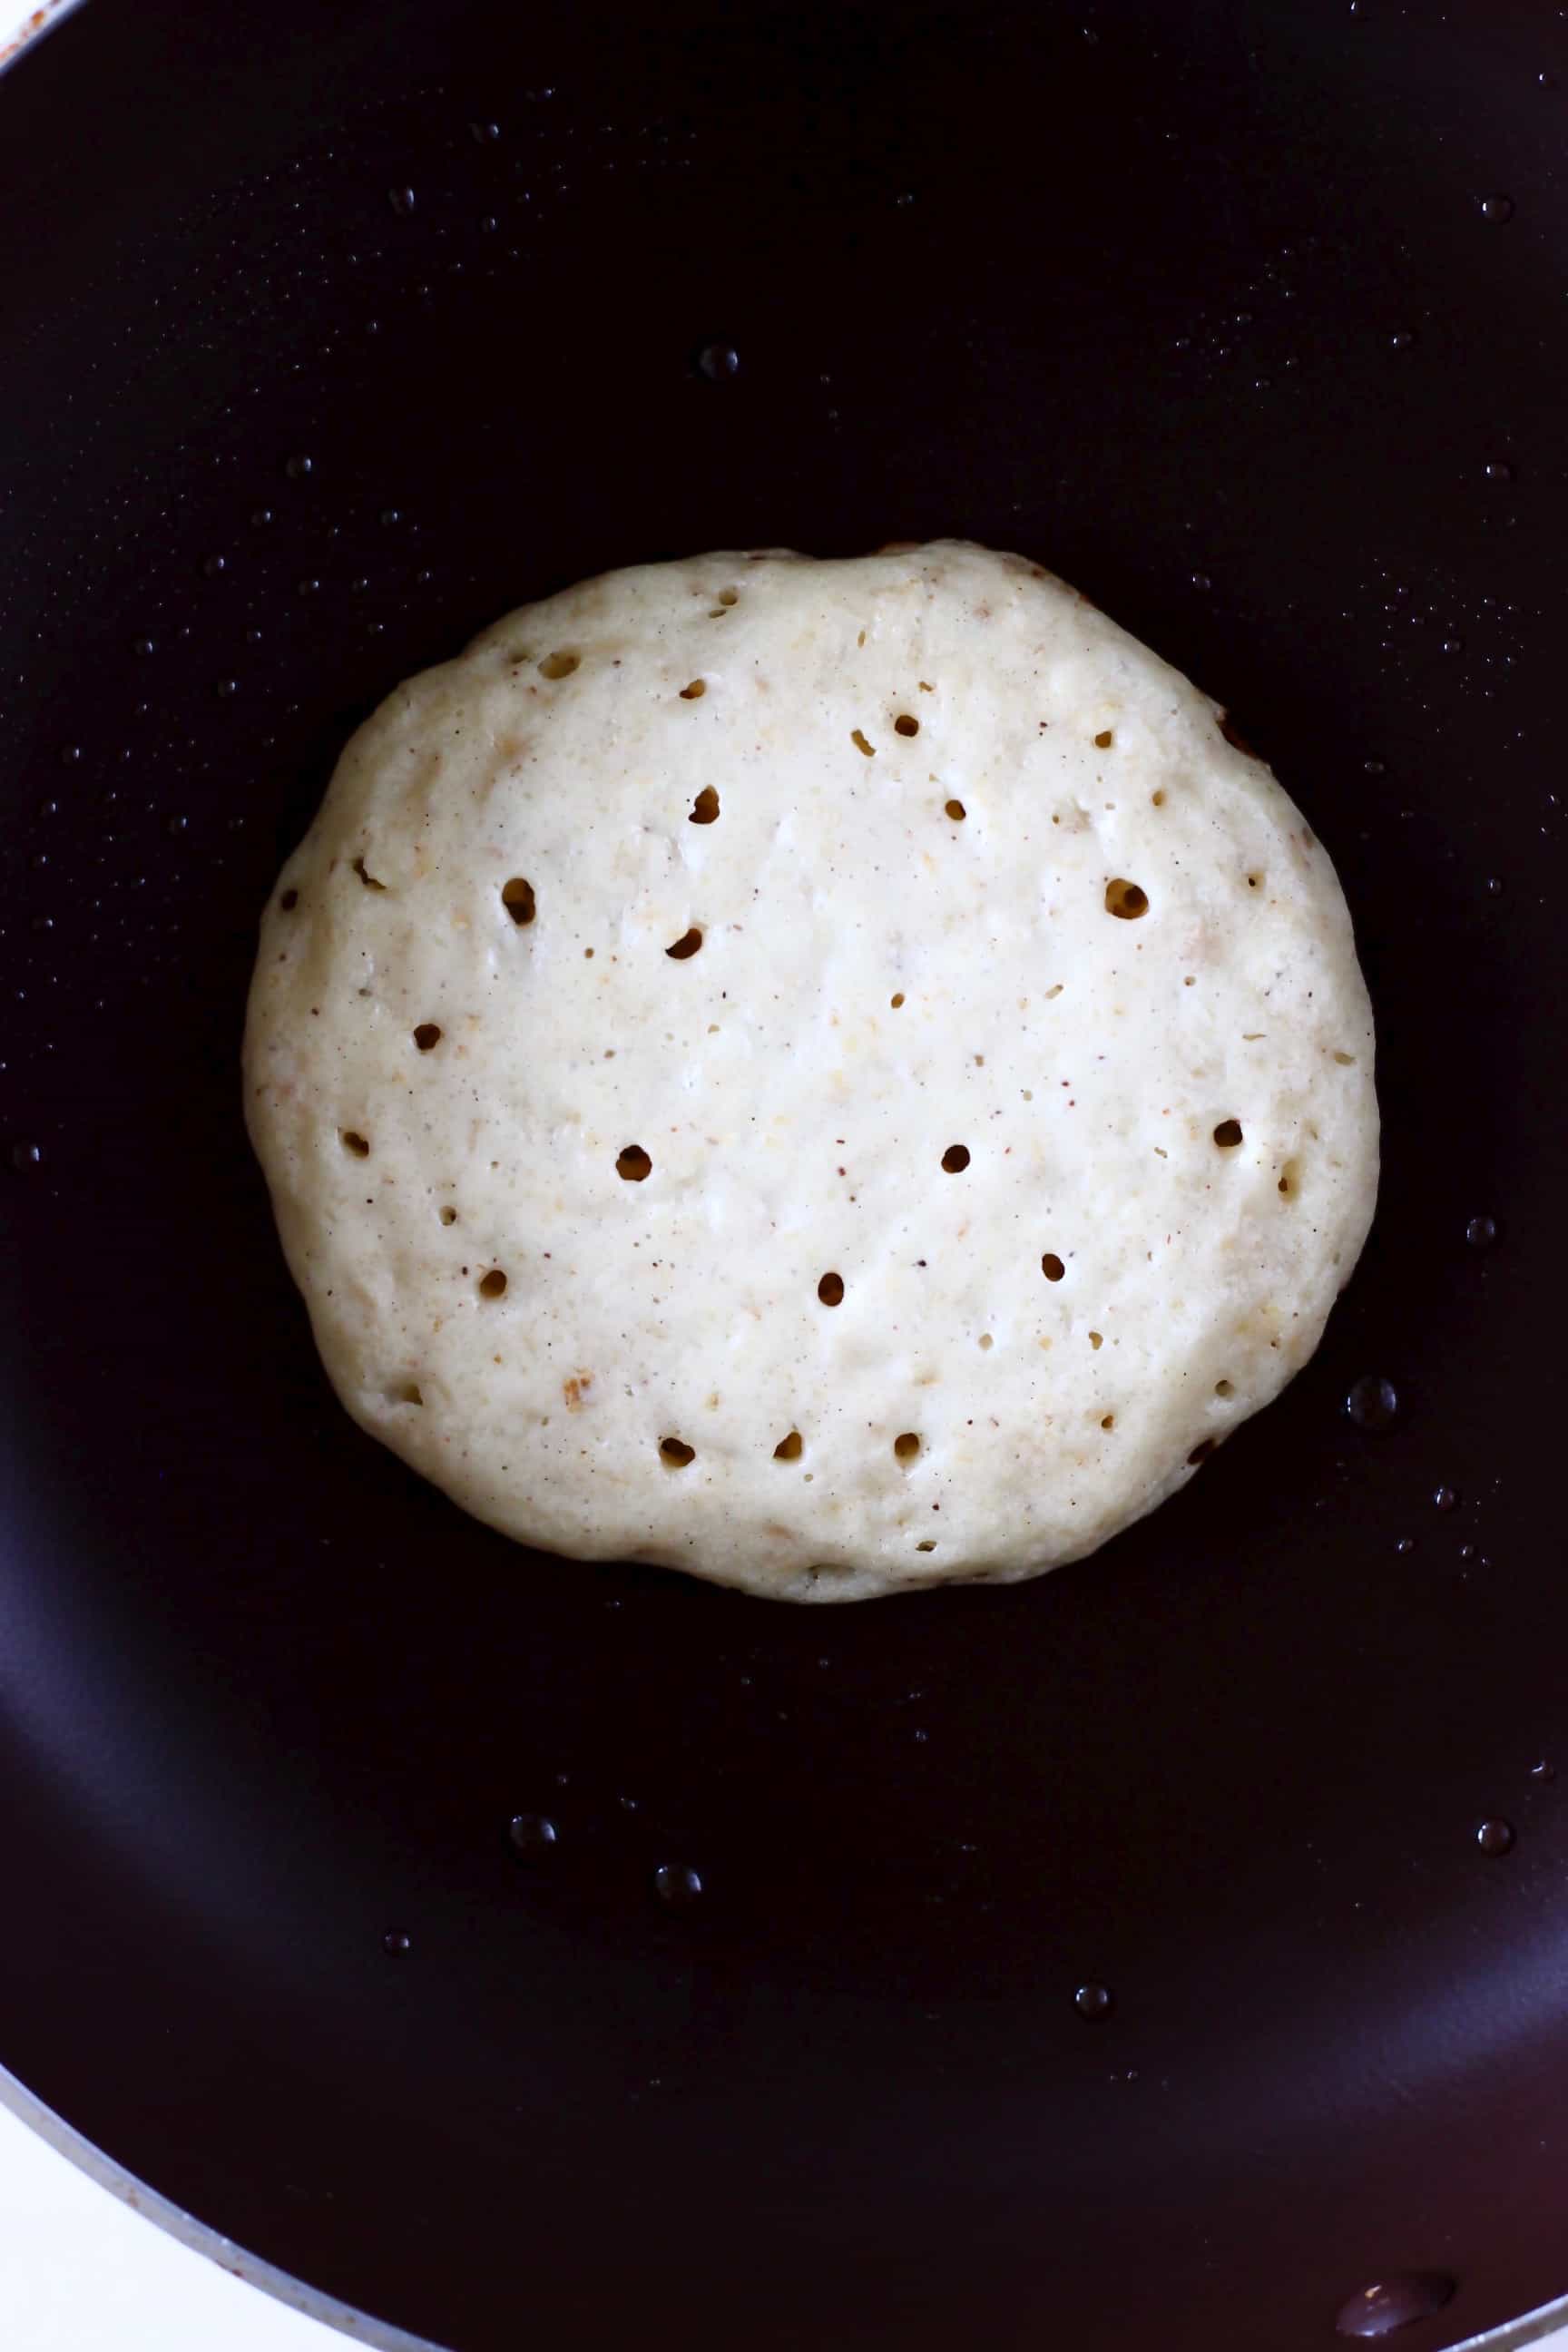 A half-cooked gluten-free vegan oatmeal pancake being cooked in a frying pan 